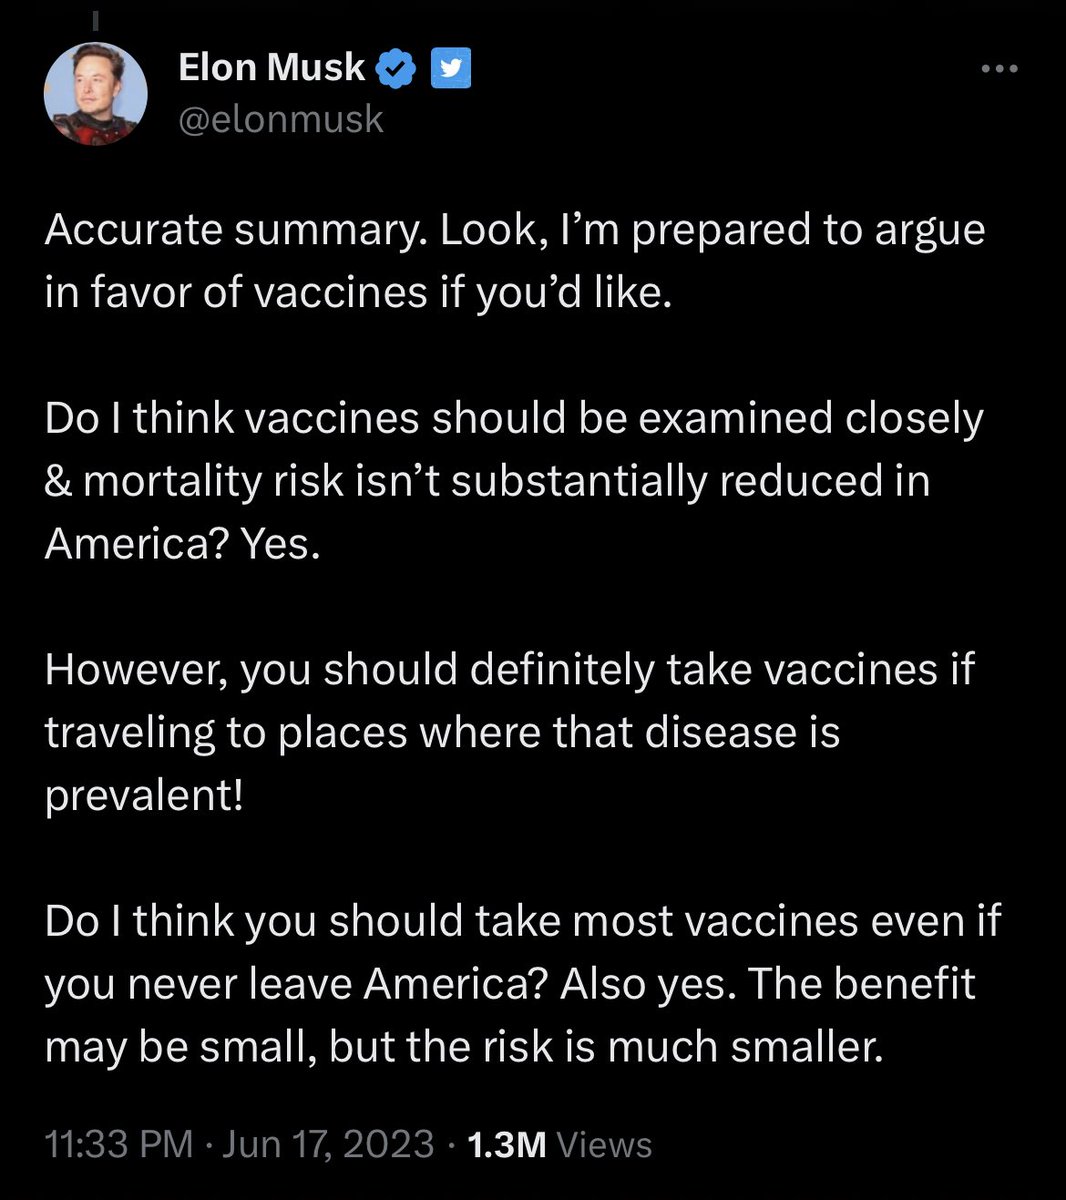 Elon can’t seem to understand that vaccines are the *reason* why diseases like polio, measles, mumps, tetanus, rubella, HiB, HepB, have low prevalence in the US.